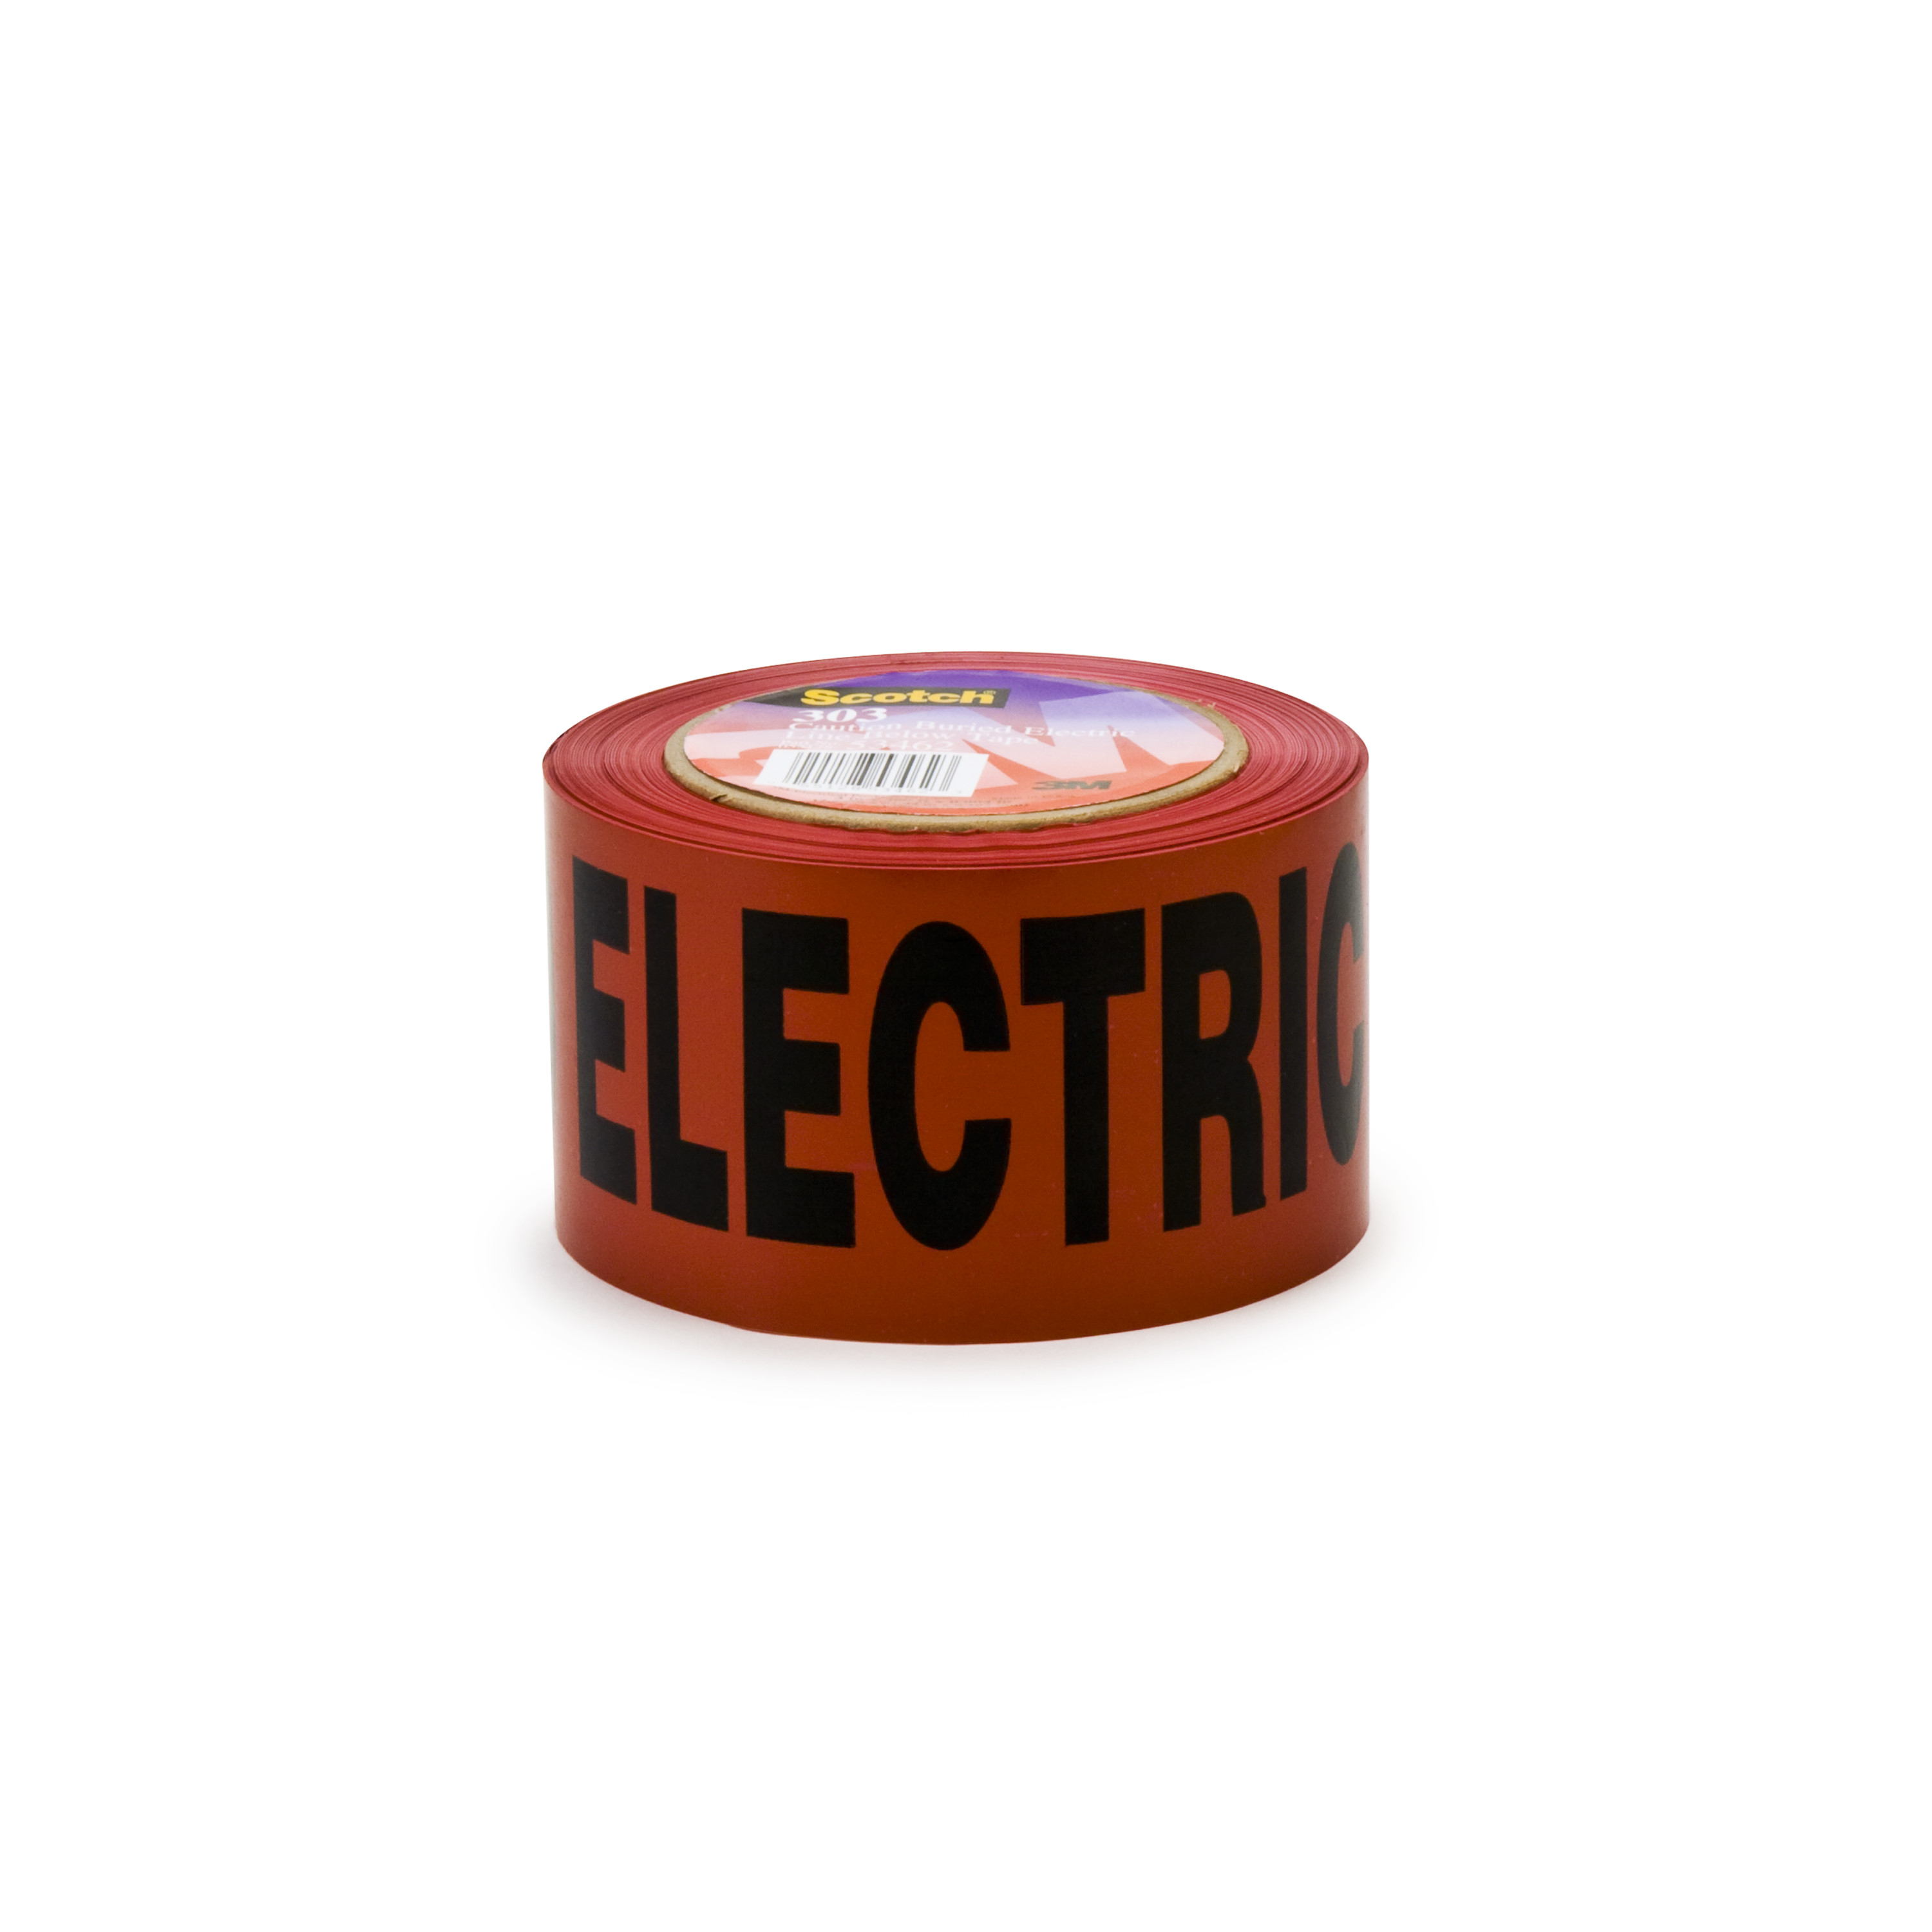 Scotch® Buried Barricade Tape 302, CAUTION BURIED ELECTRIC LINE, 3 in x
1000 ft, Red, 8 rolls/Case